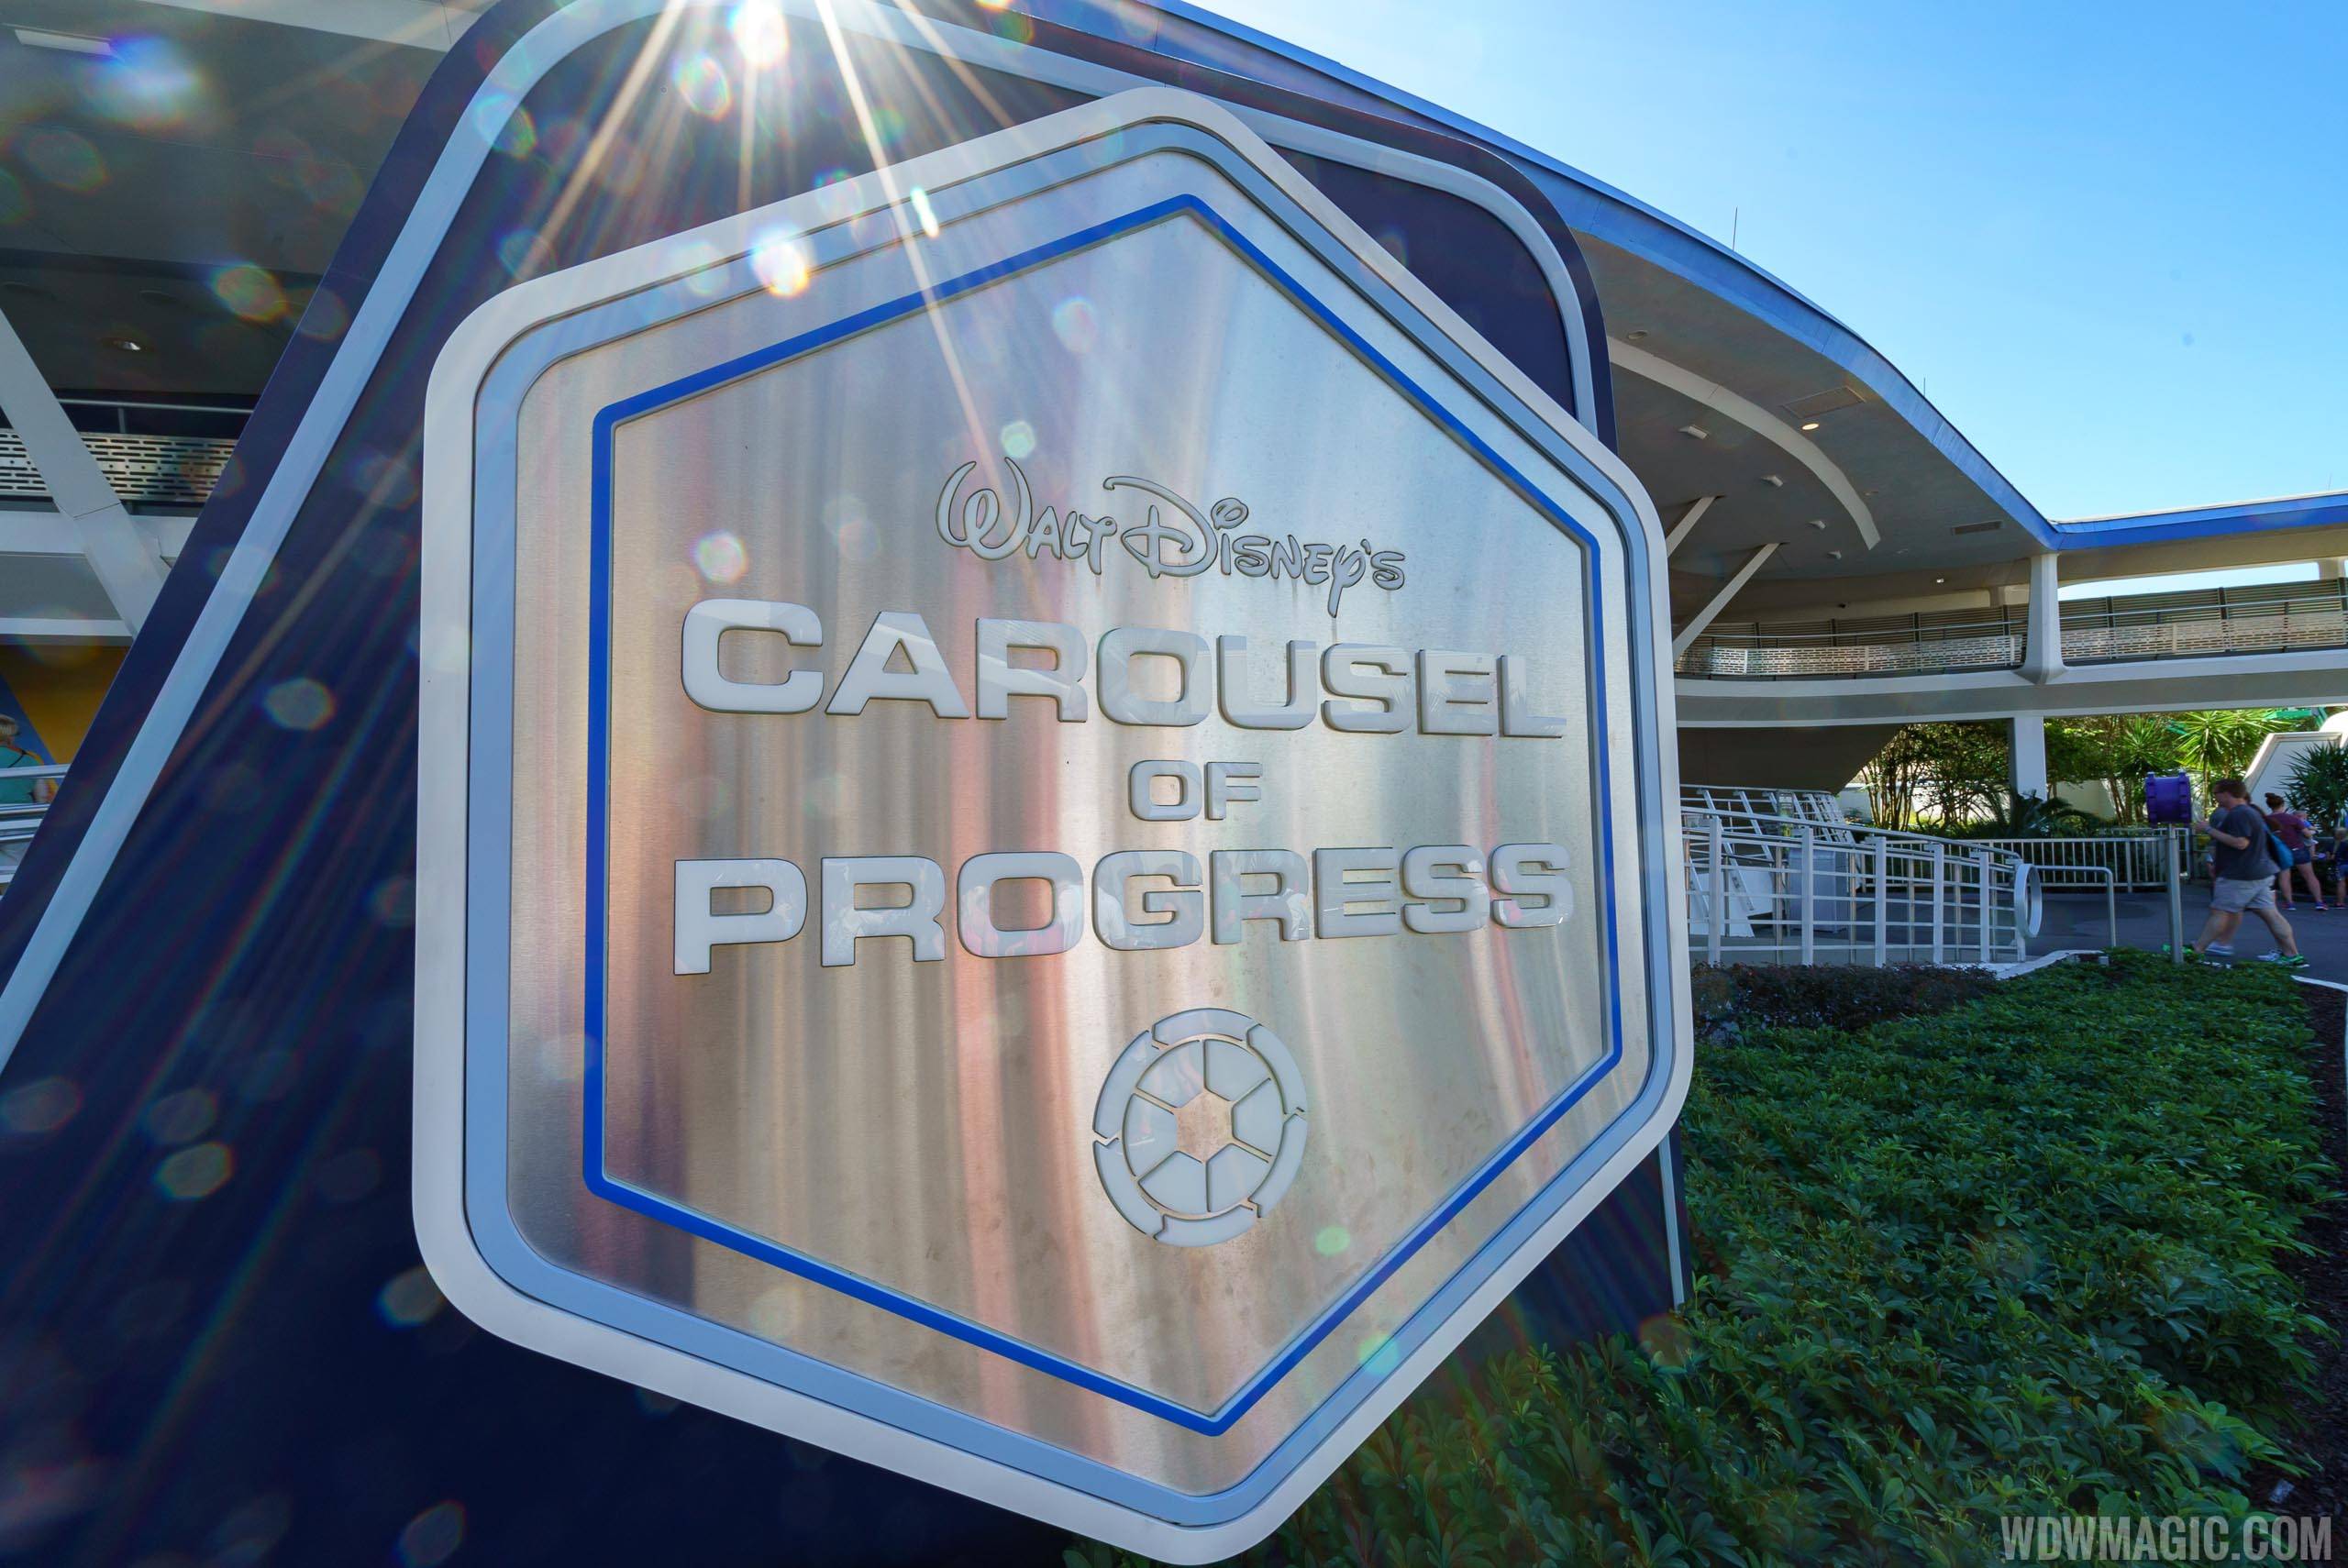 New marquee sign at Carousel of Progress